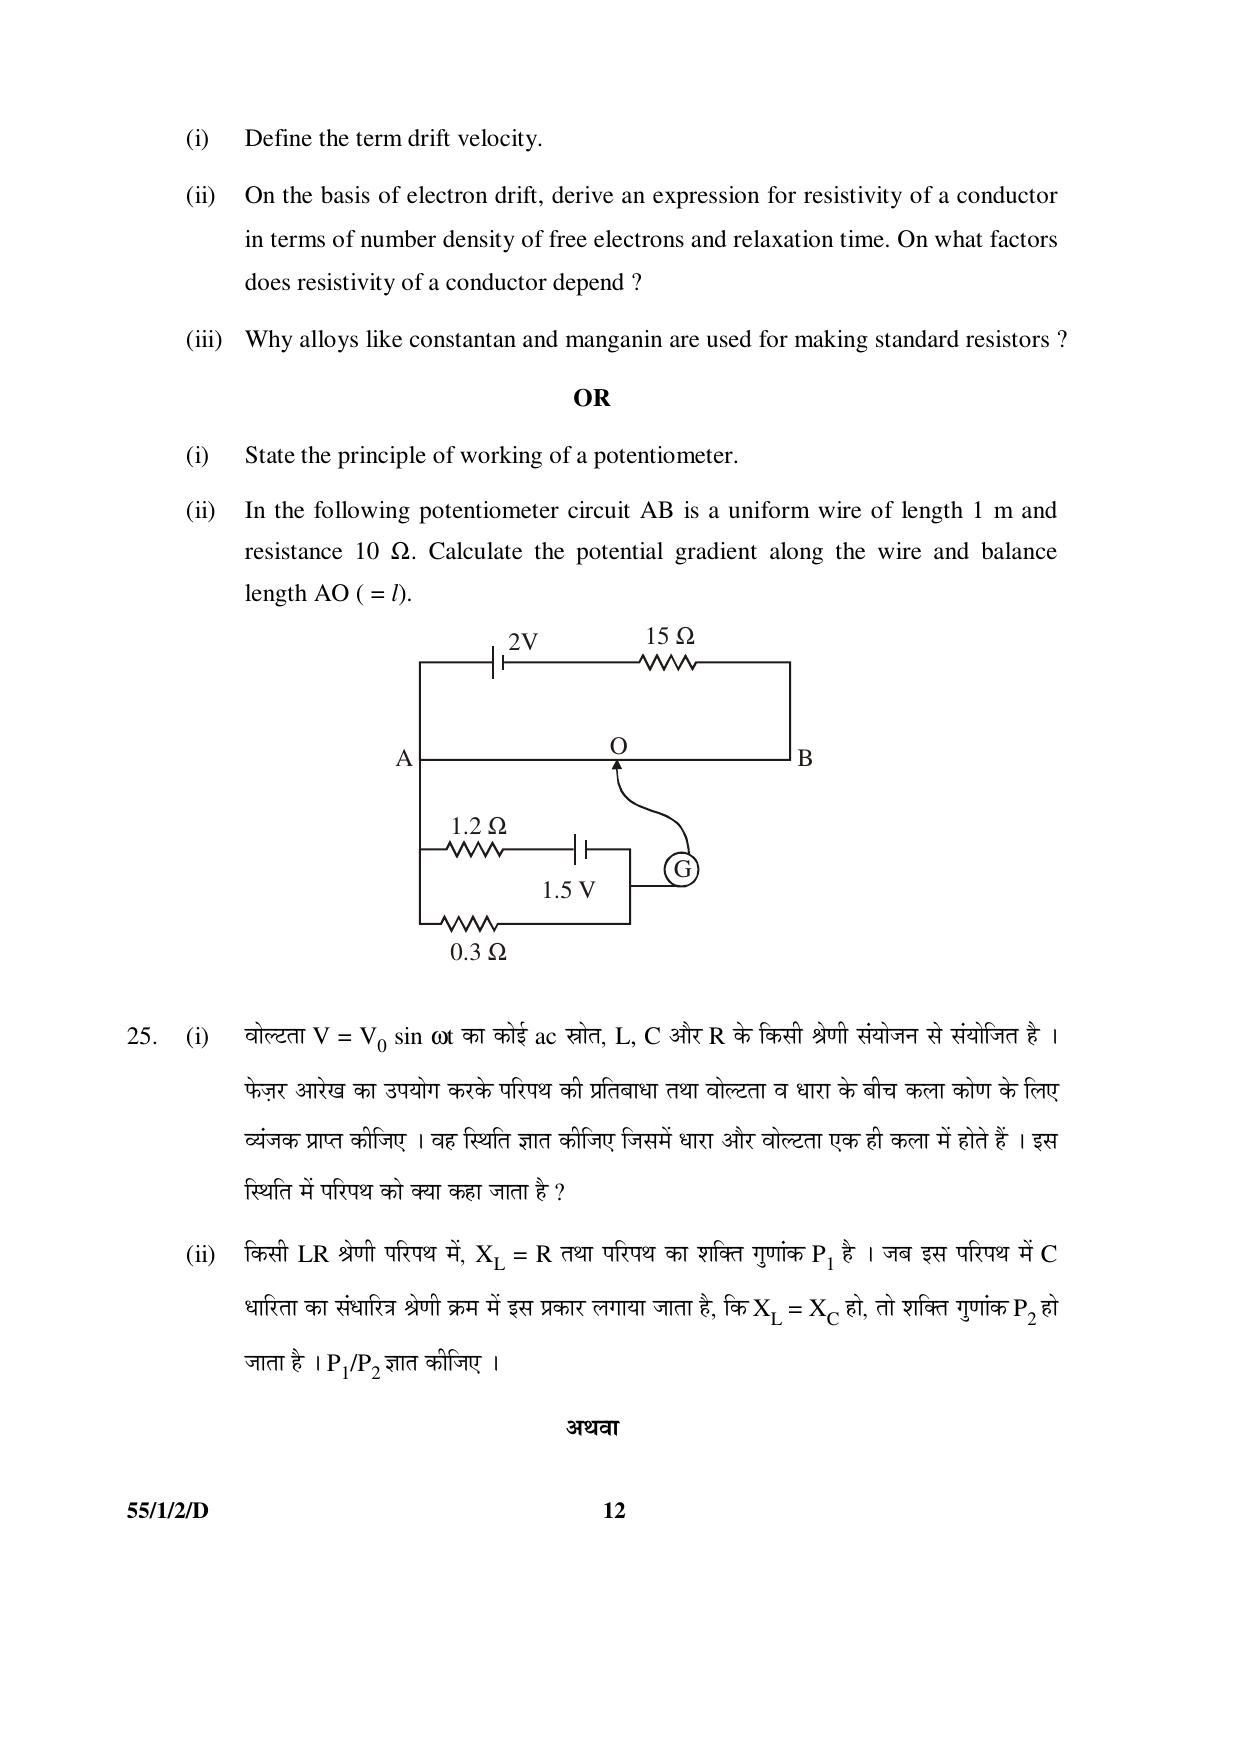 CBSE Class 12 55-1-2-D PHYSICS 2016 Question Paper - Page 12